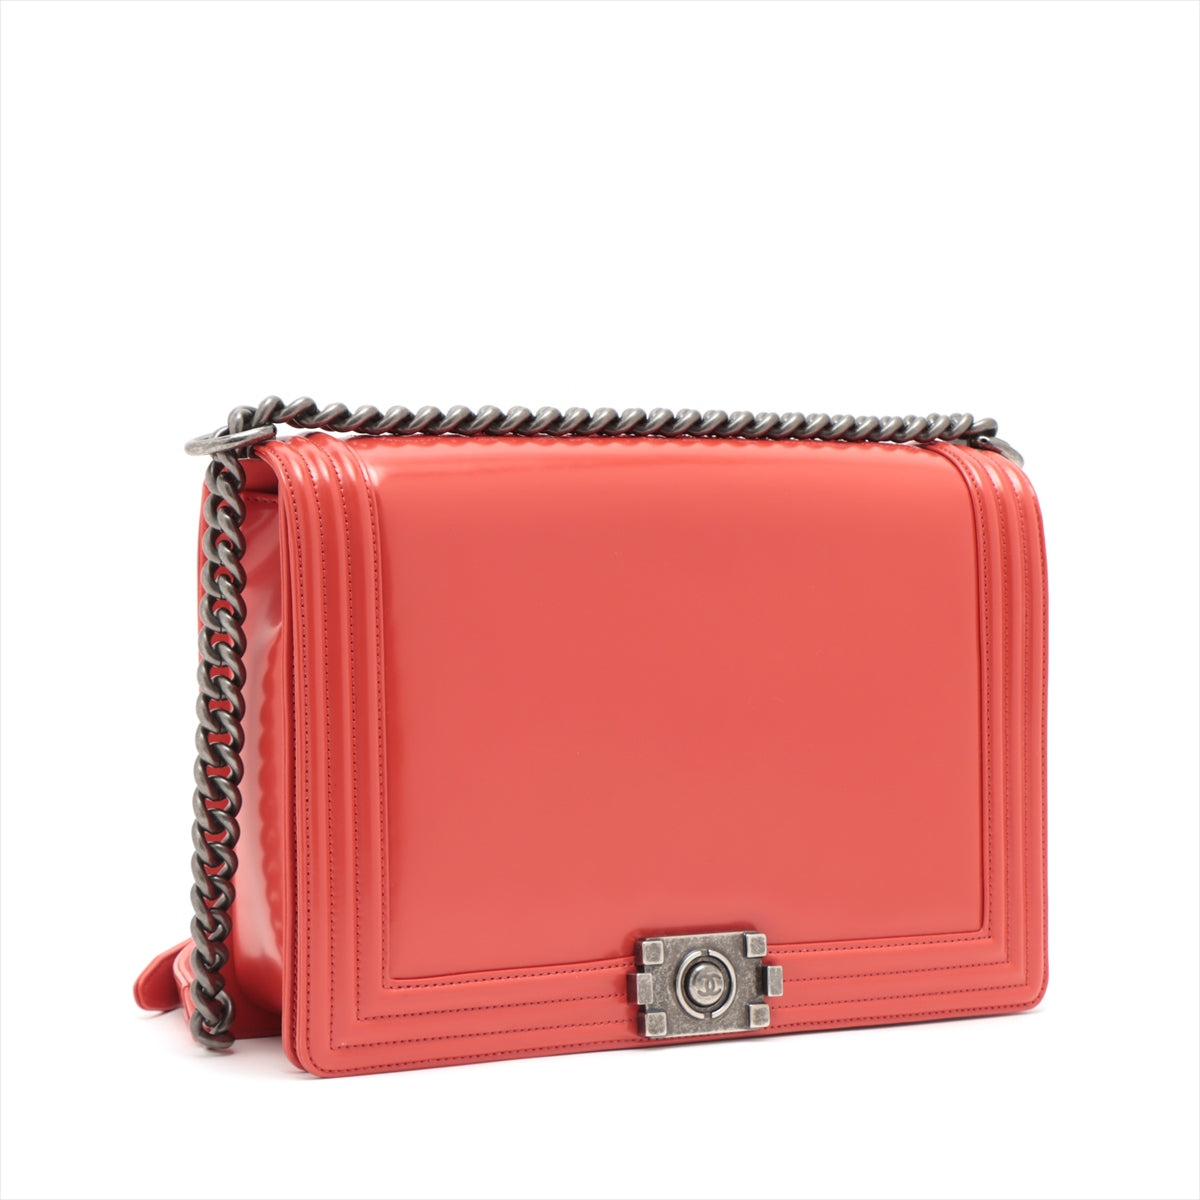 Chanel Boy Chanel Leather Chain Shoulder Bag Red Silver Gold